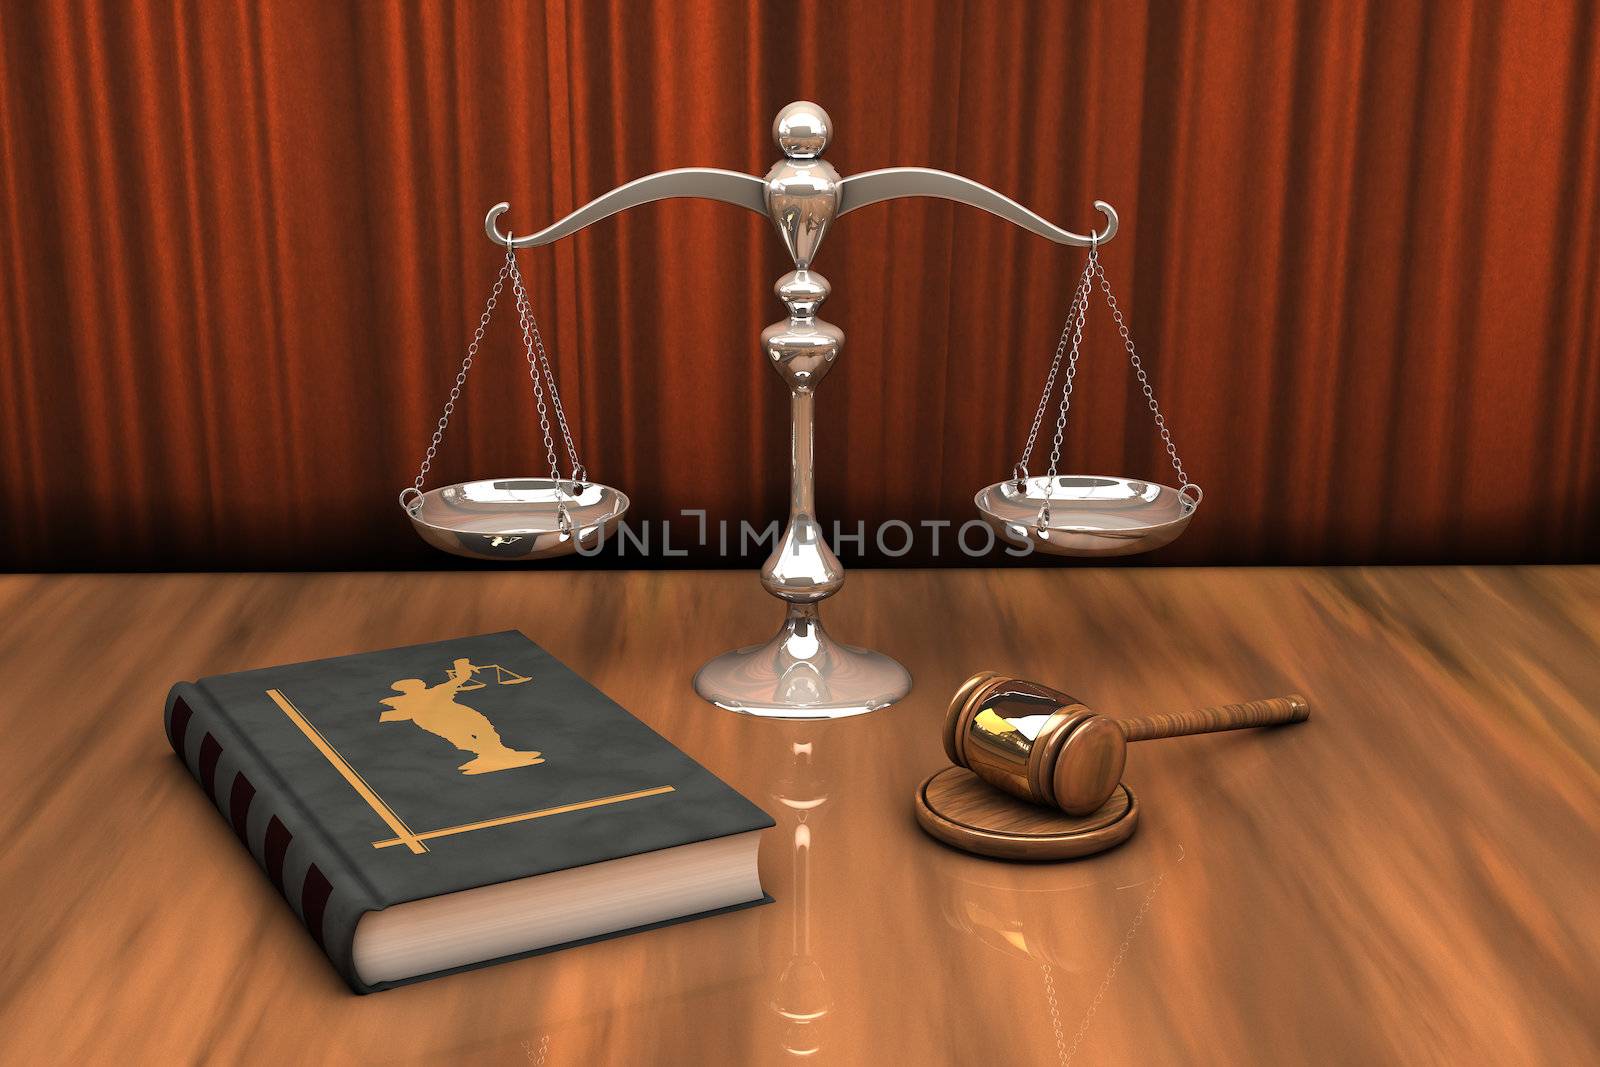 Gavel, scale and law book on the table by gorgrigo